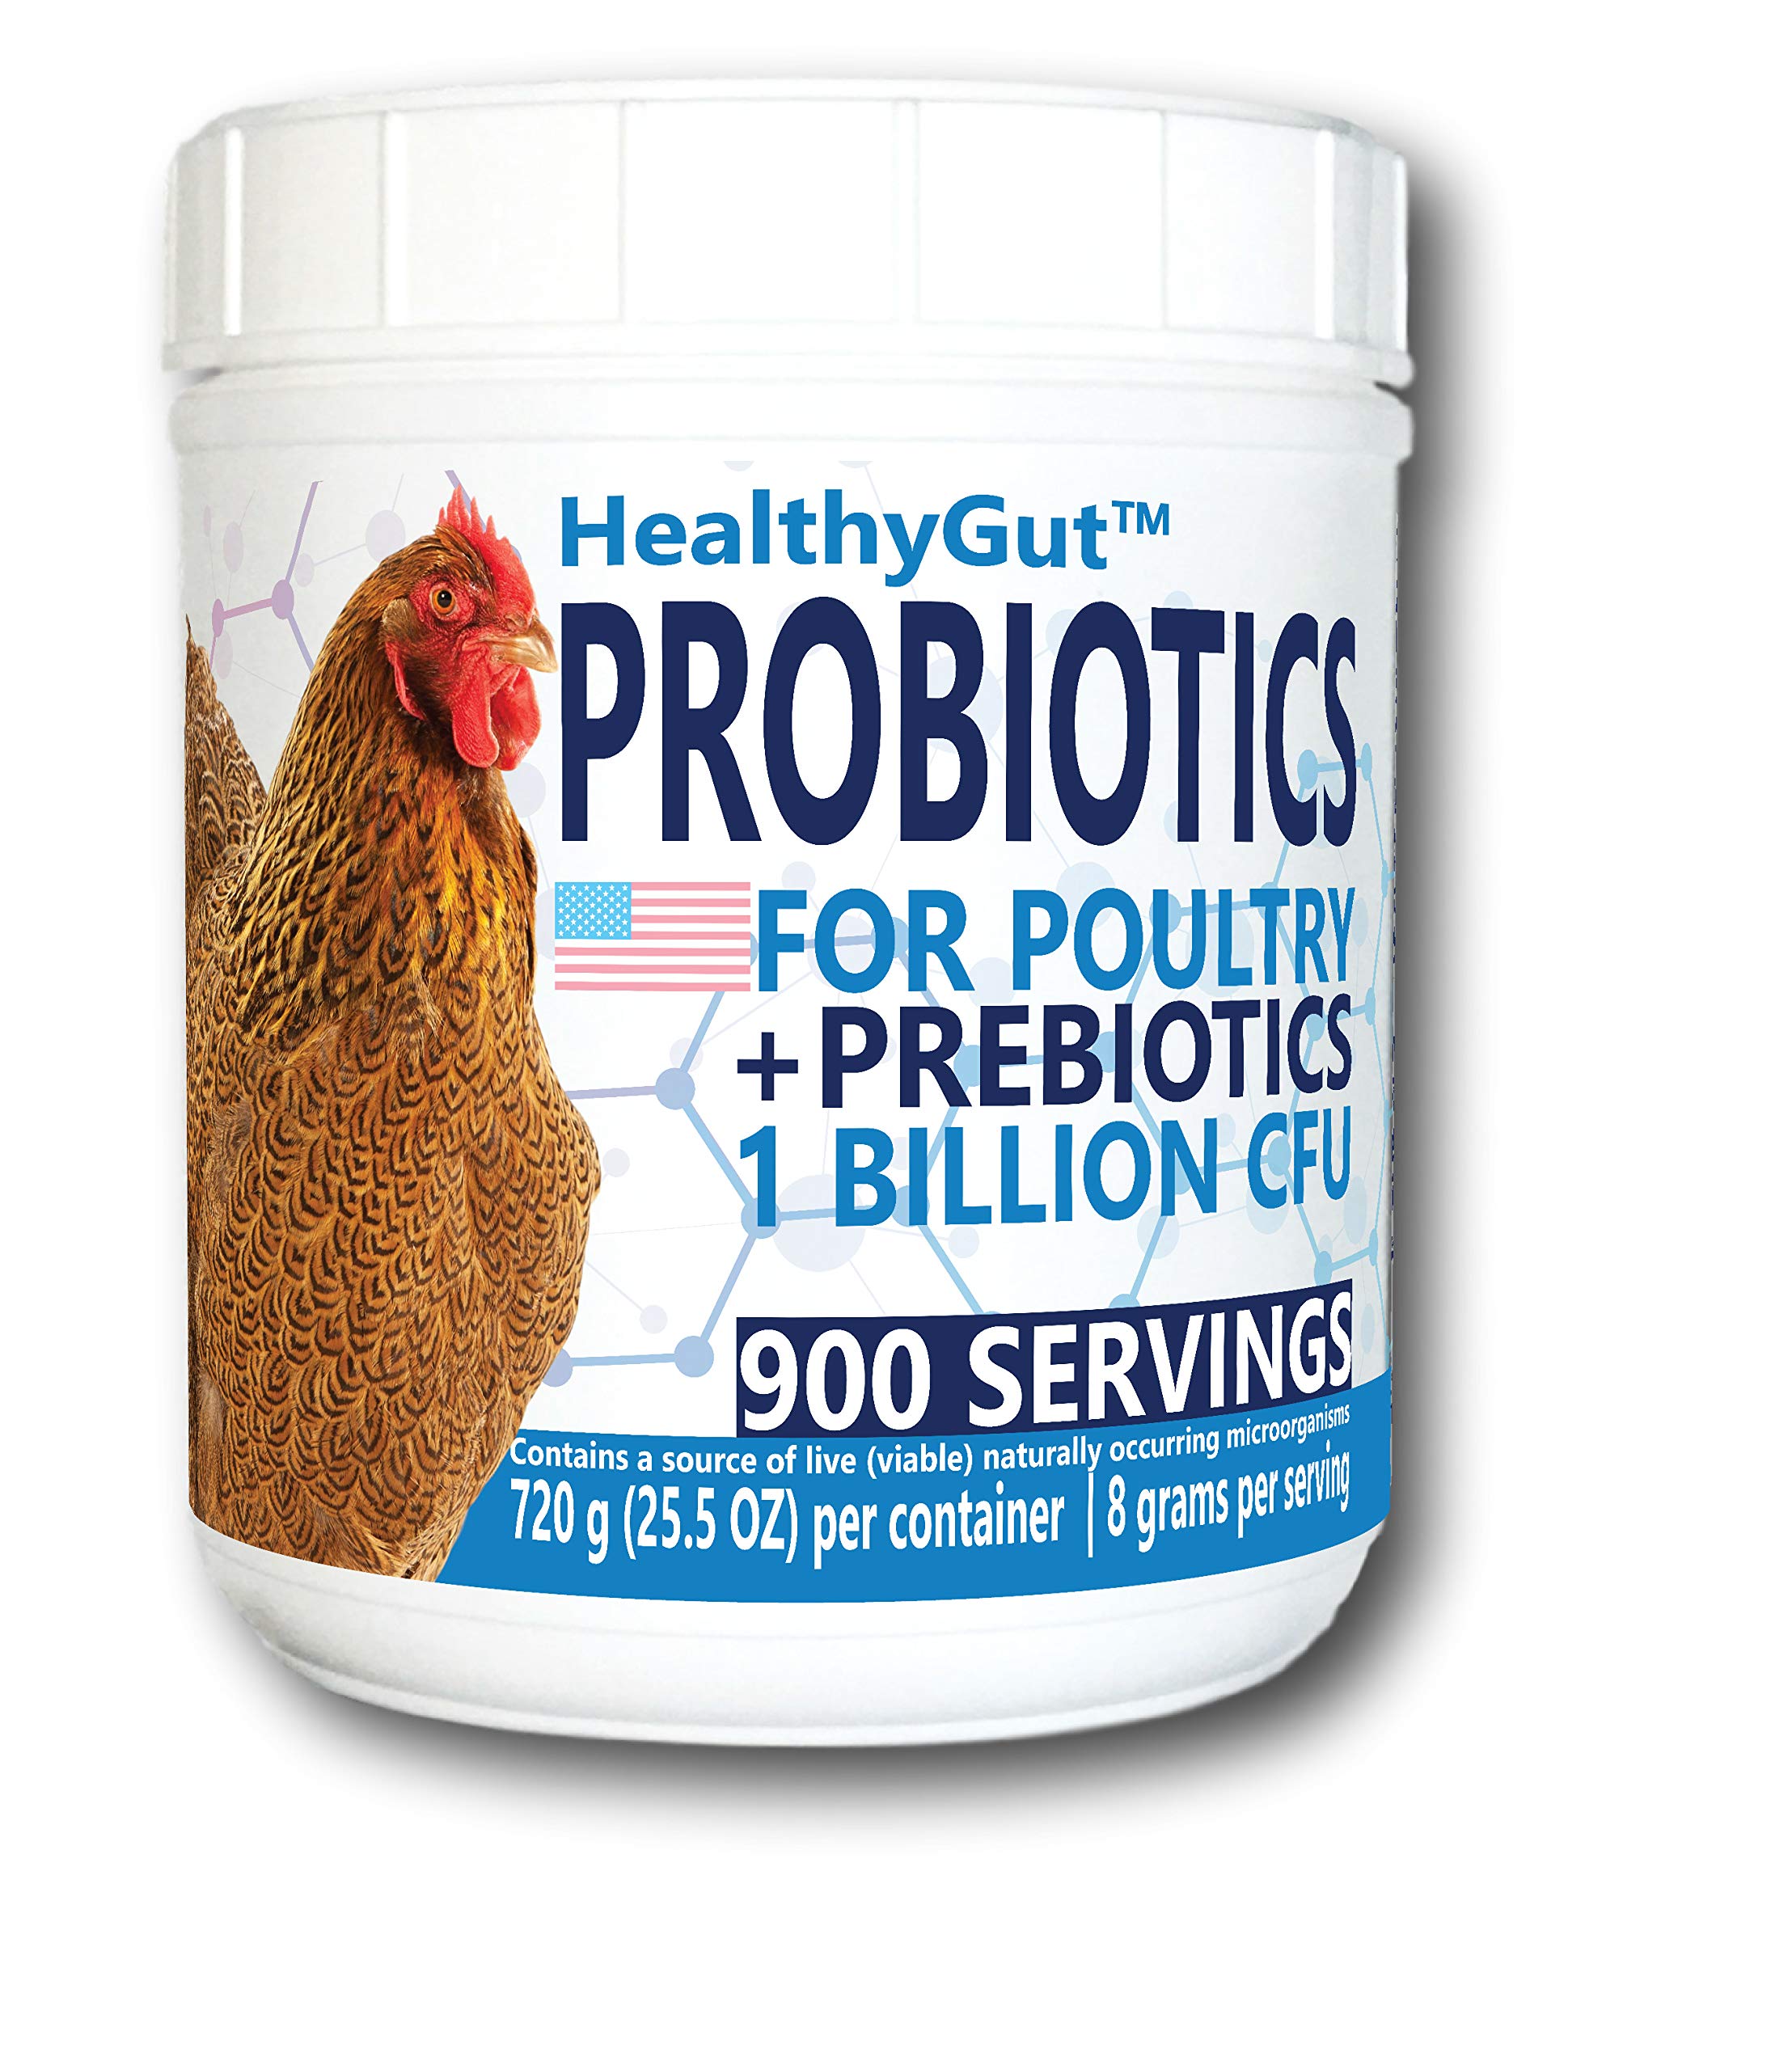 Probiotic products/supplement